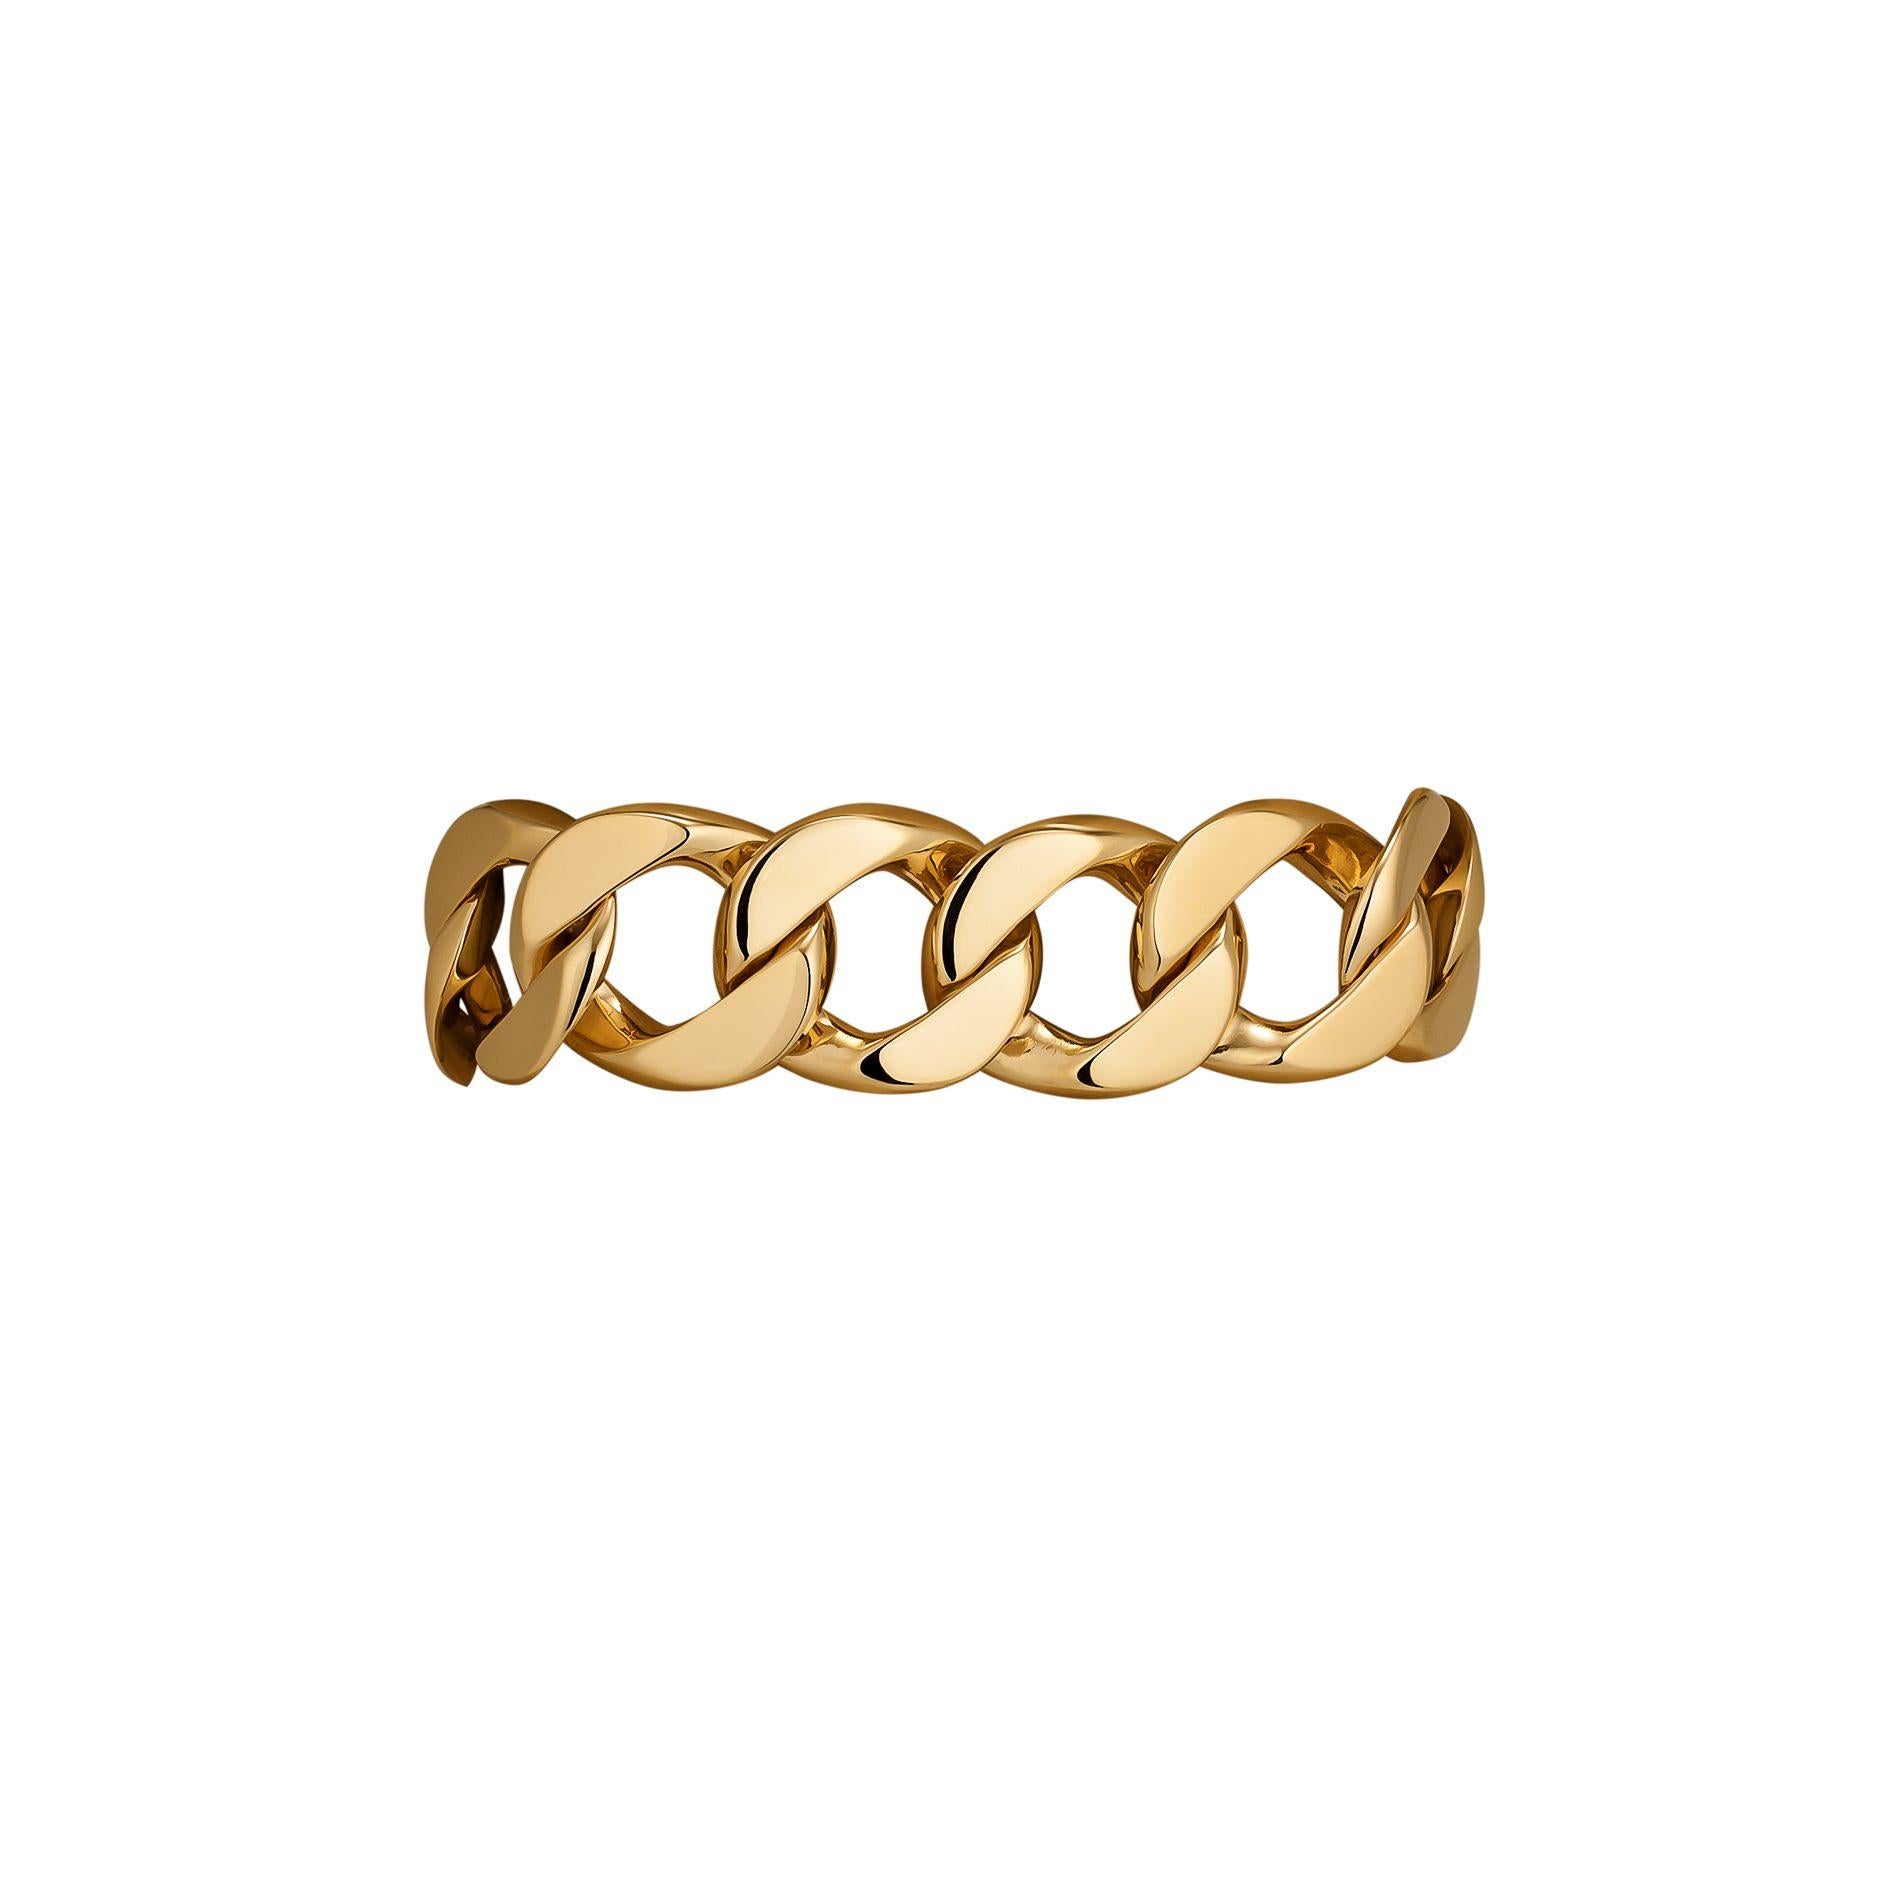 This handsome Cartier vintage, circa 1965, curb link 14 karat yellow gold bracelet is as timelessly elegant as it gets.  Whether worn alone or with other bracelets, this iconic collectible is a must have heirloom piece.  7 1/2